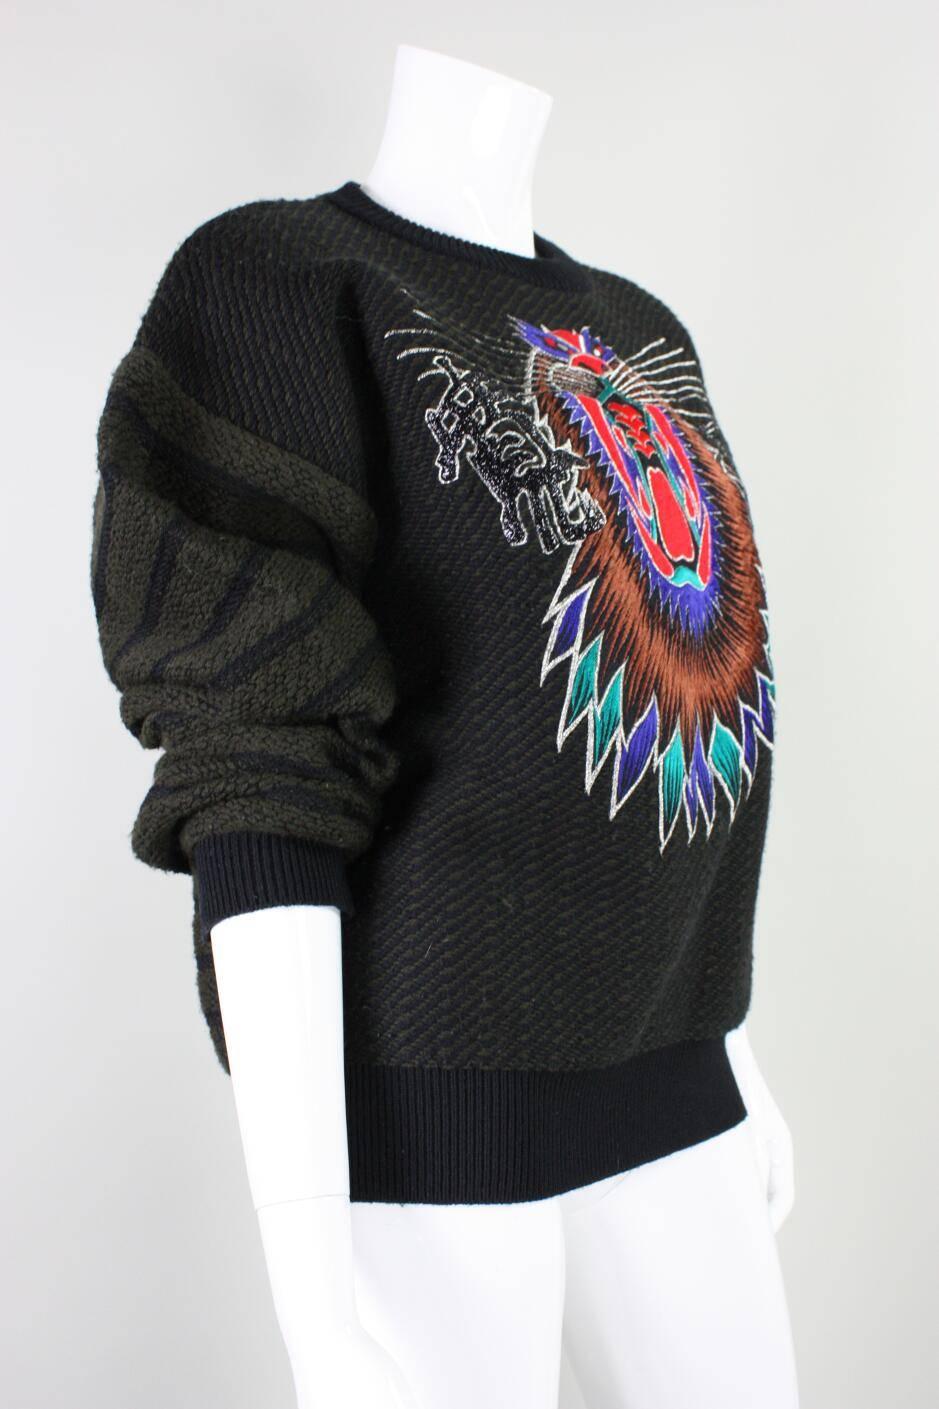 Vintage sweater from Kansai Yamamoto dates to the 1980's and is made of black and brown wool.  It features a brightly colored fierce creature on the bust that is flanked by Japanese characters.  Round neck.  Long sleeves.  Unlined. No